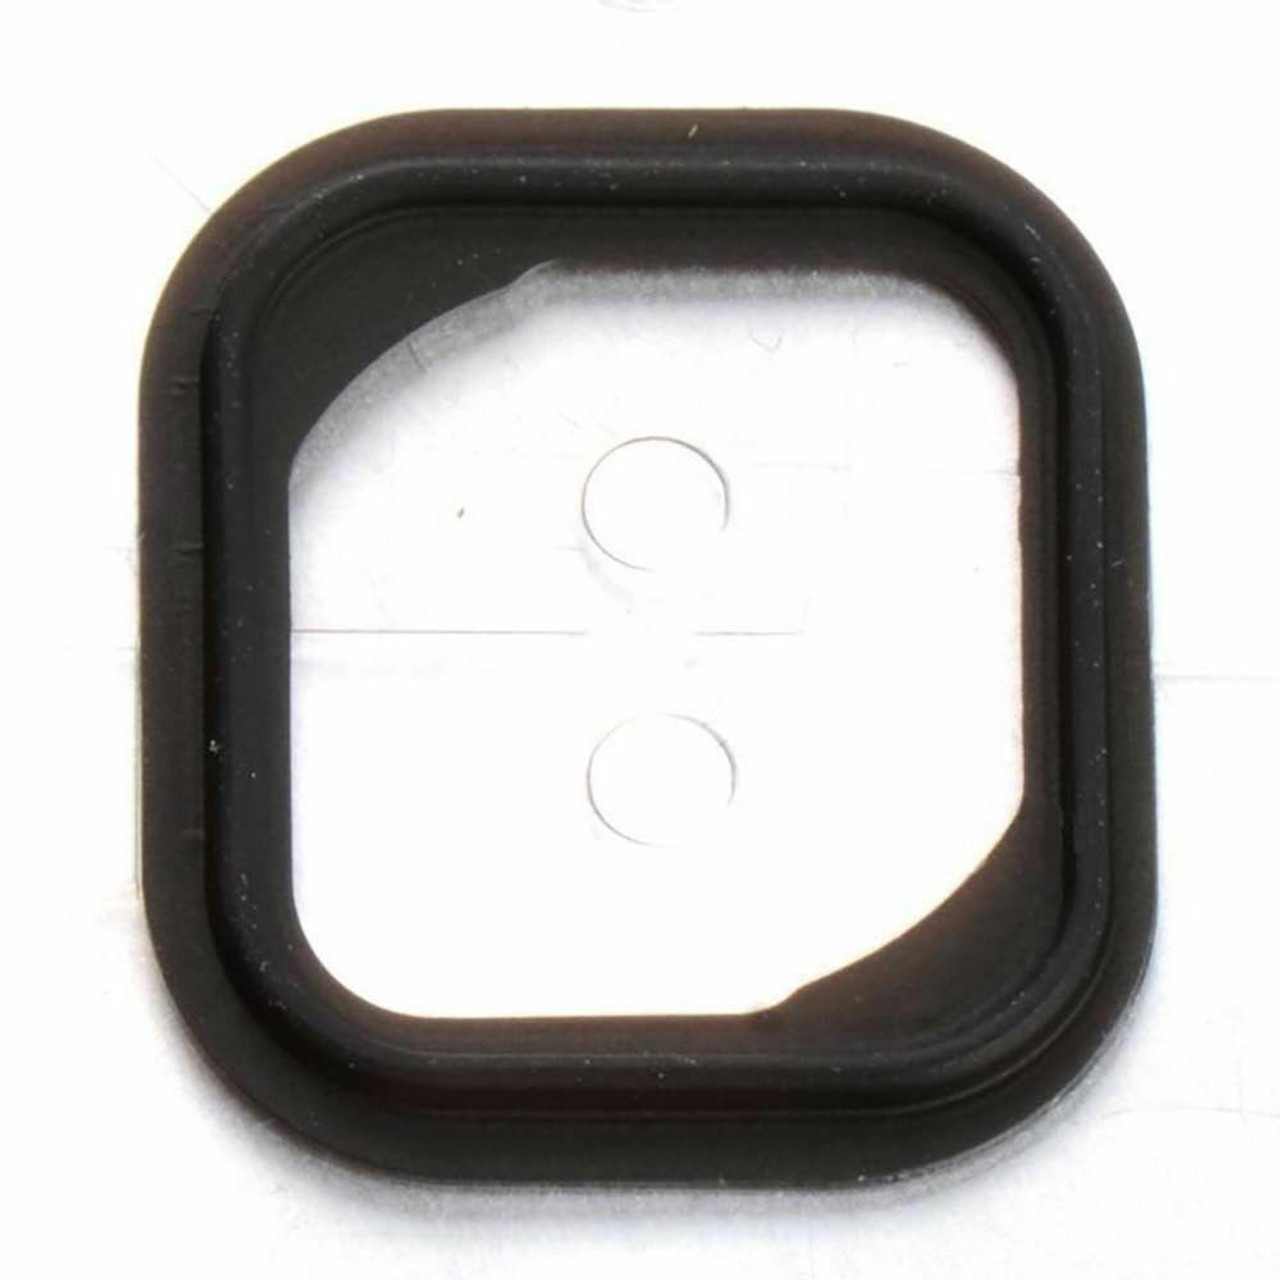 5x Replacement Rubber Gasket Home Button Holder Adhesive Sticker For iPhone 5S